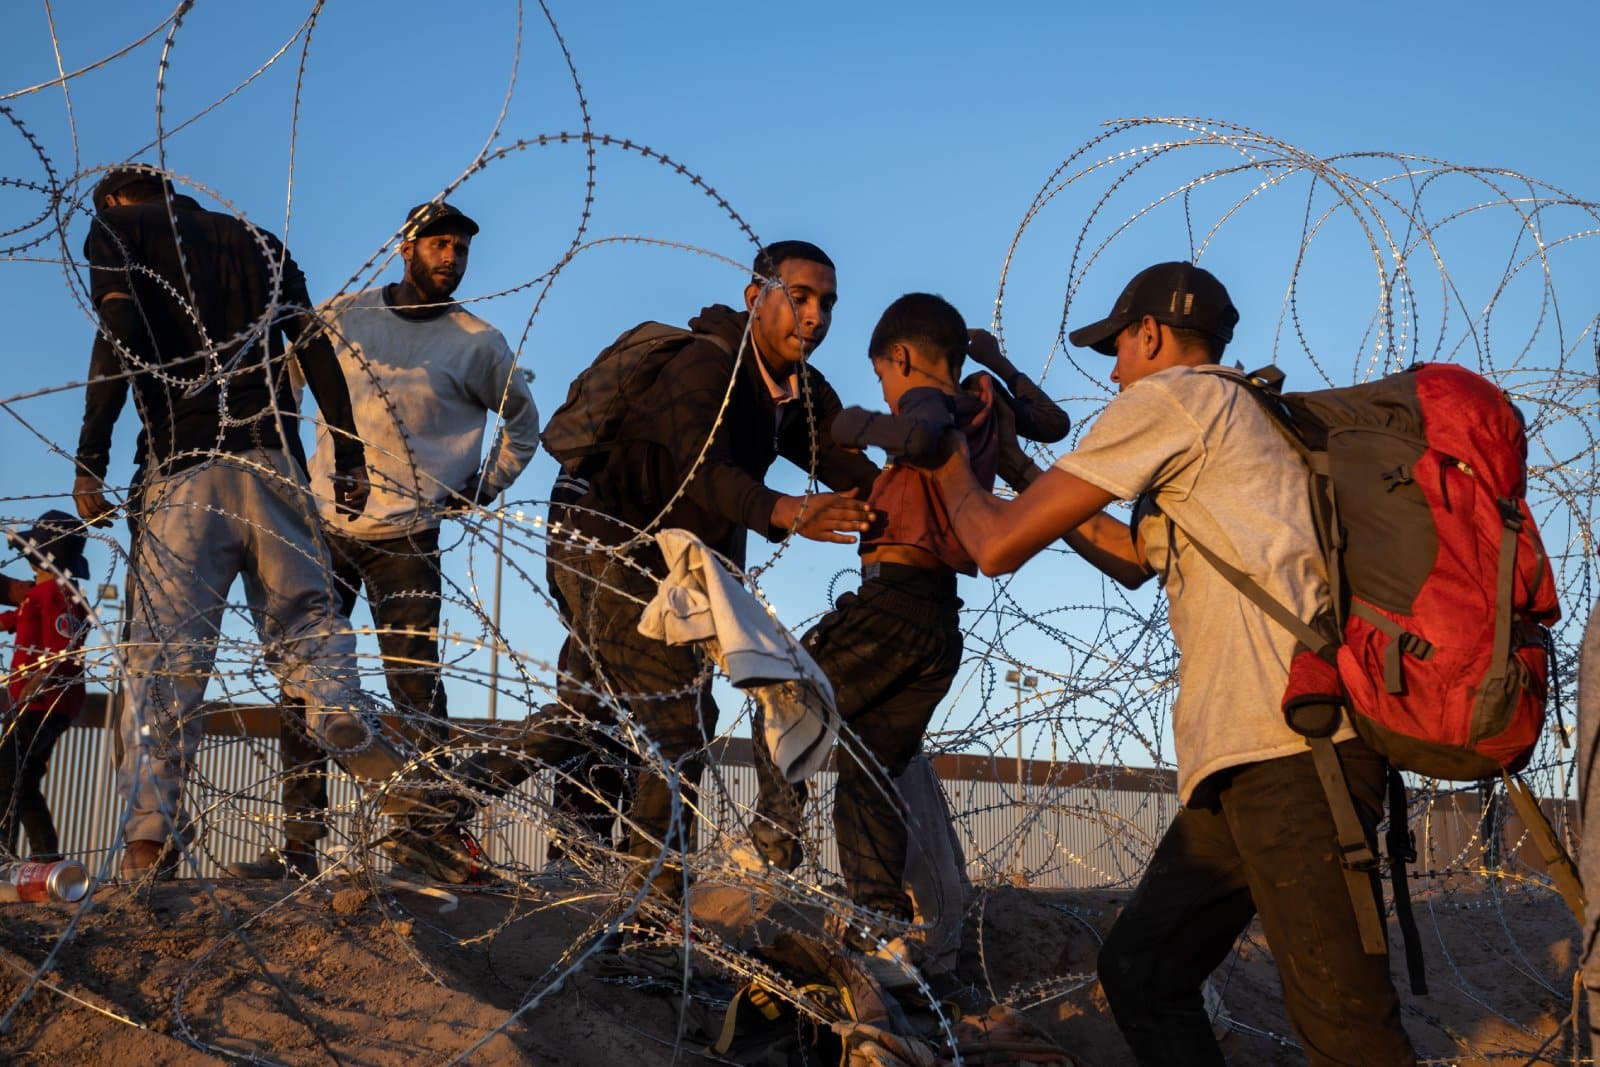 Image Credit: Shutterstock / David Peinado Romero <p><span>Efforts to streamline and humanize the asylum system have been promised, including reducing the backlog of cases and improving the process of applying for asylum.</span></p>